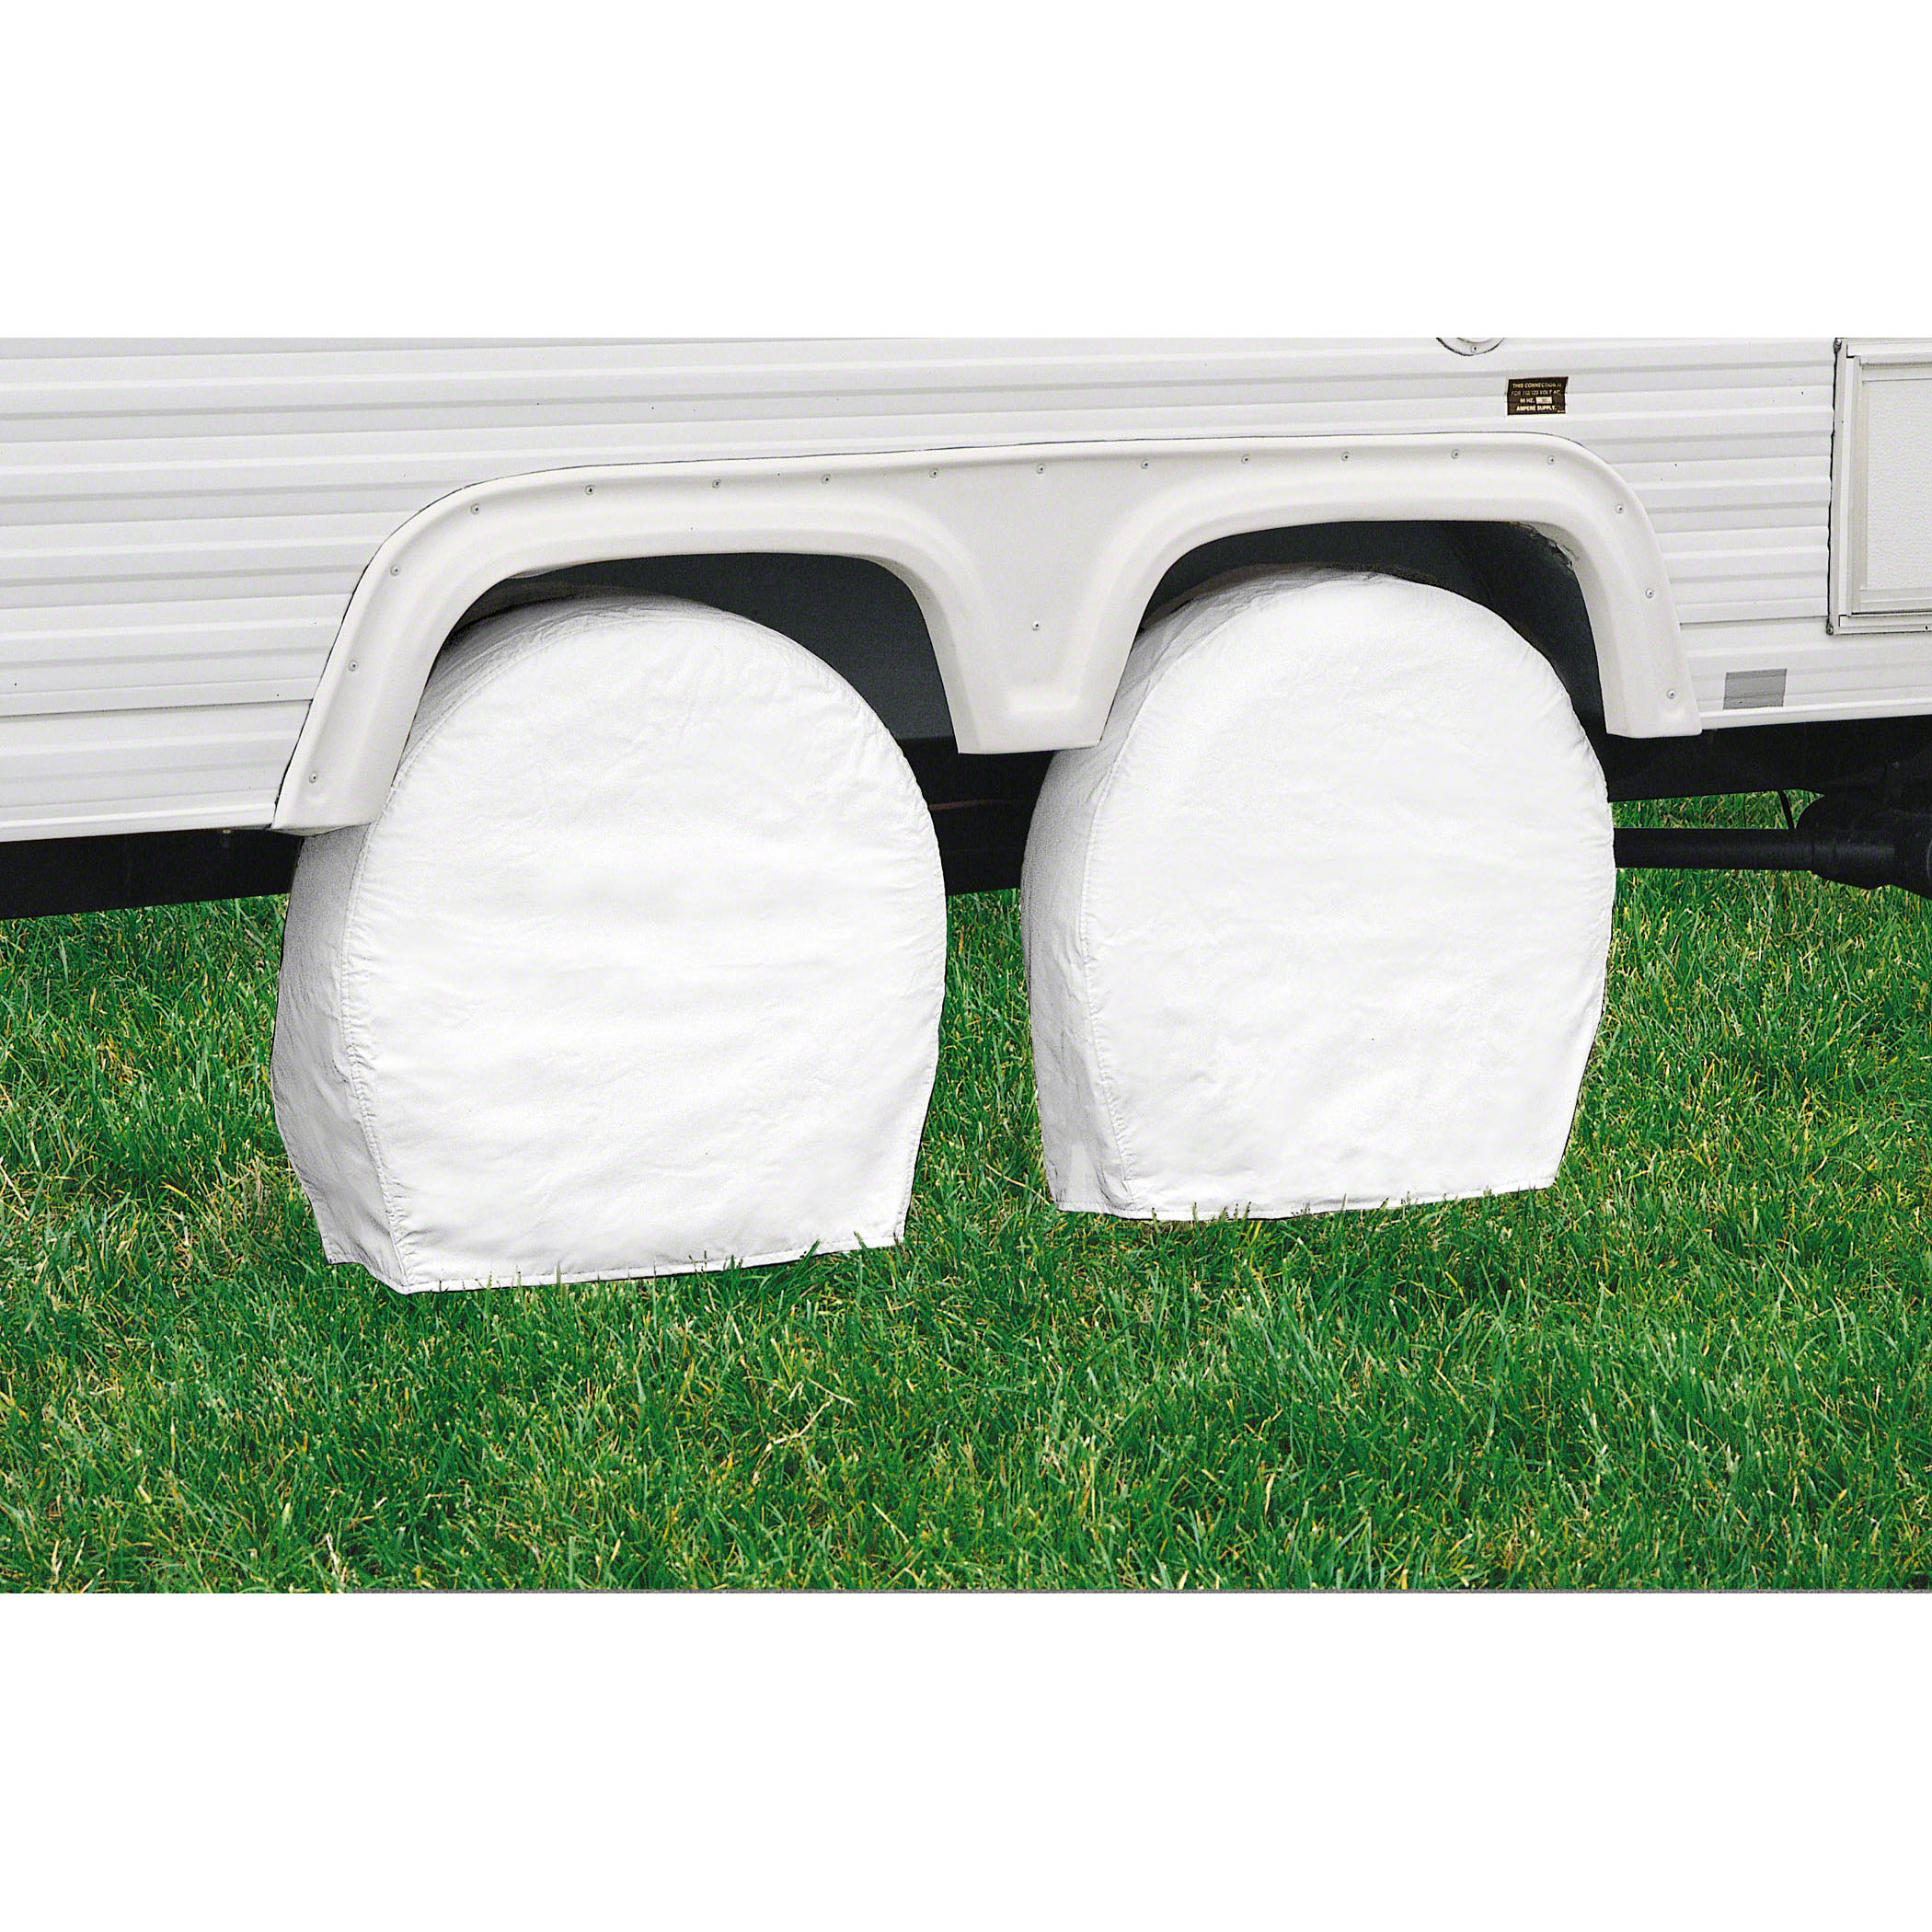 Classic Accessories Over Drive RV Wheel Covers, Wheels 27